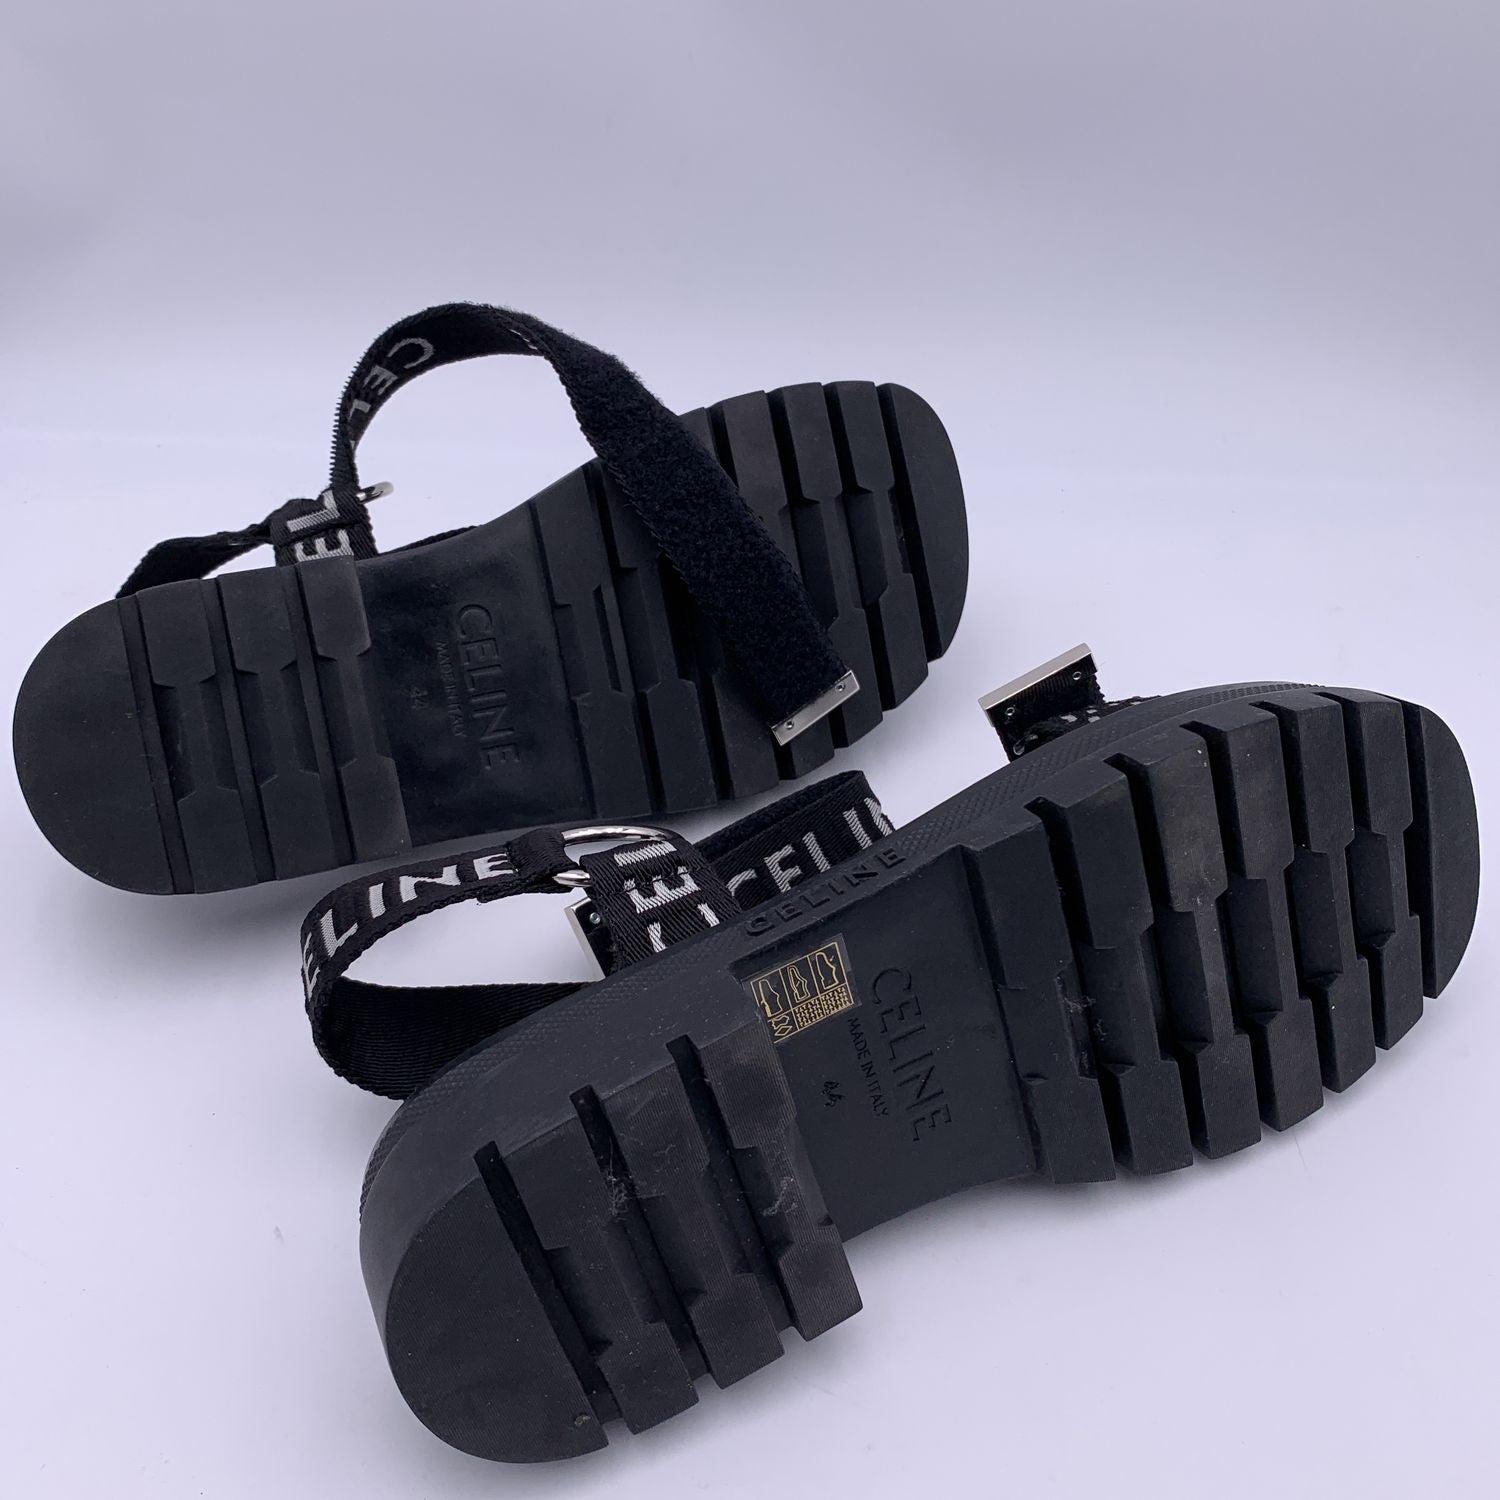 Celine Black Leo Strappy Sandals Shoes with Jacquard Straps Size 44 In Excellent Condition For Sale In Rome, Rome